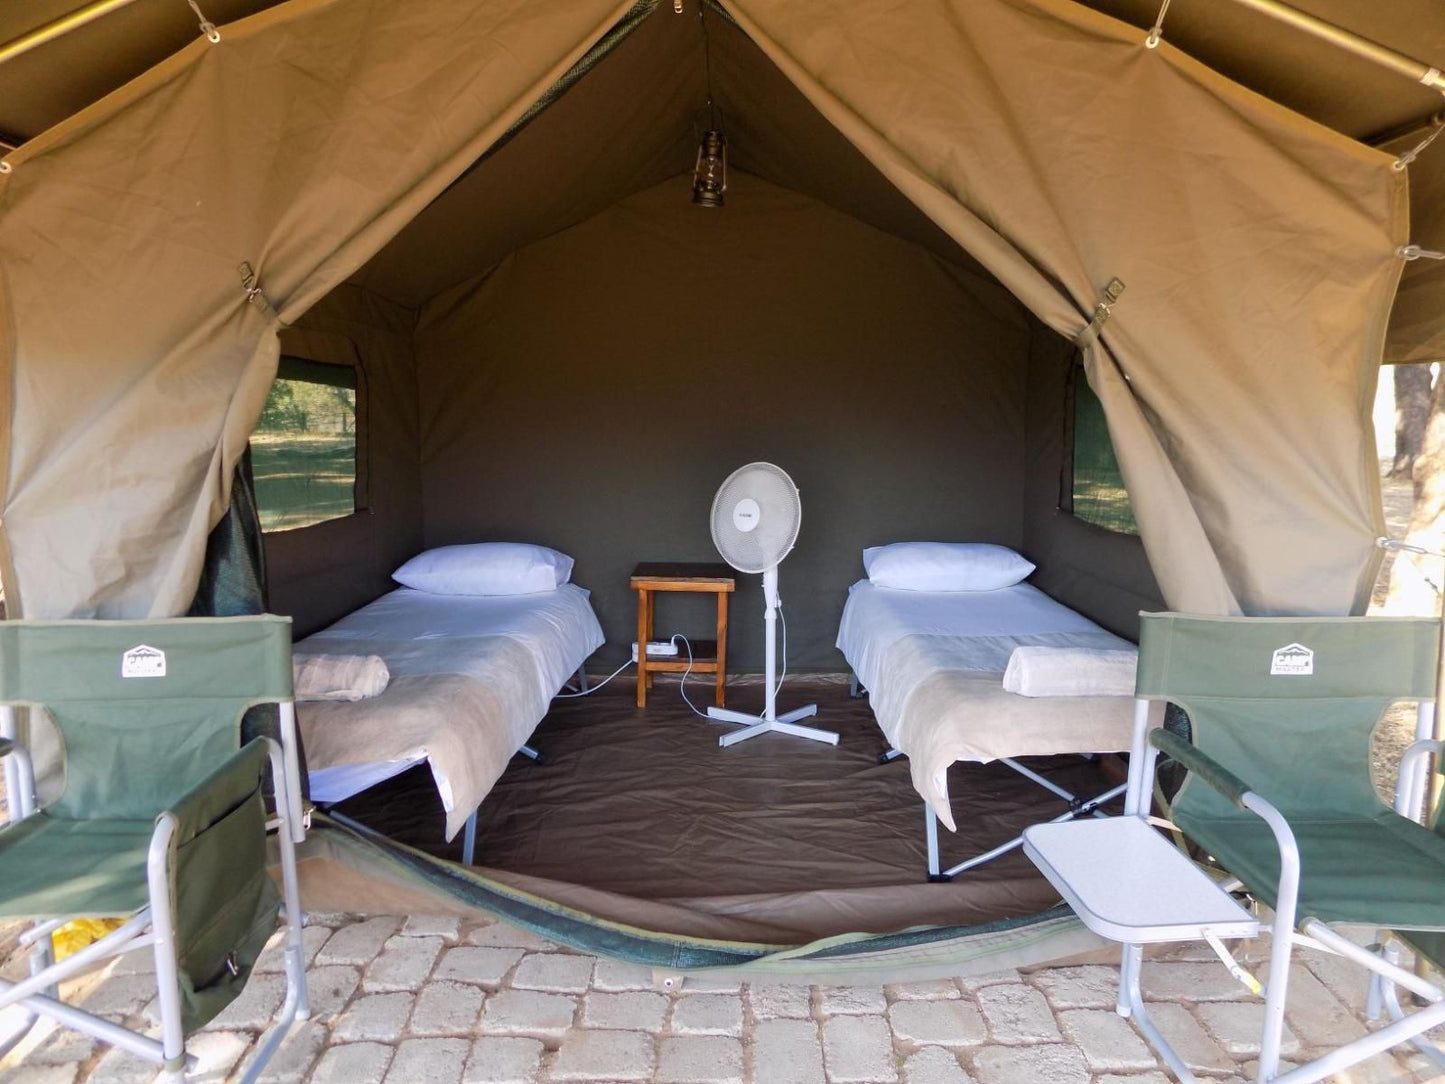 Limpokwena Nature Reserve Alldays Limpopo Province South Africa Tent, Architecture, Bedroom